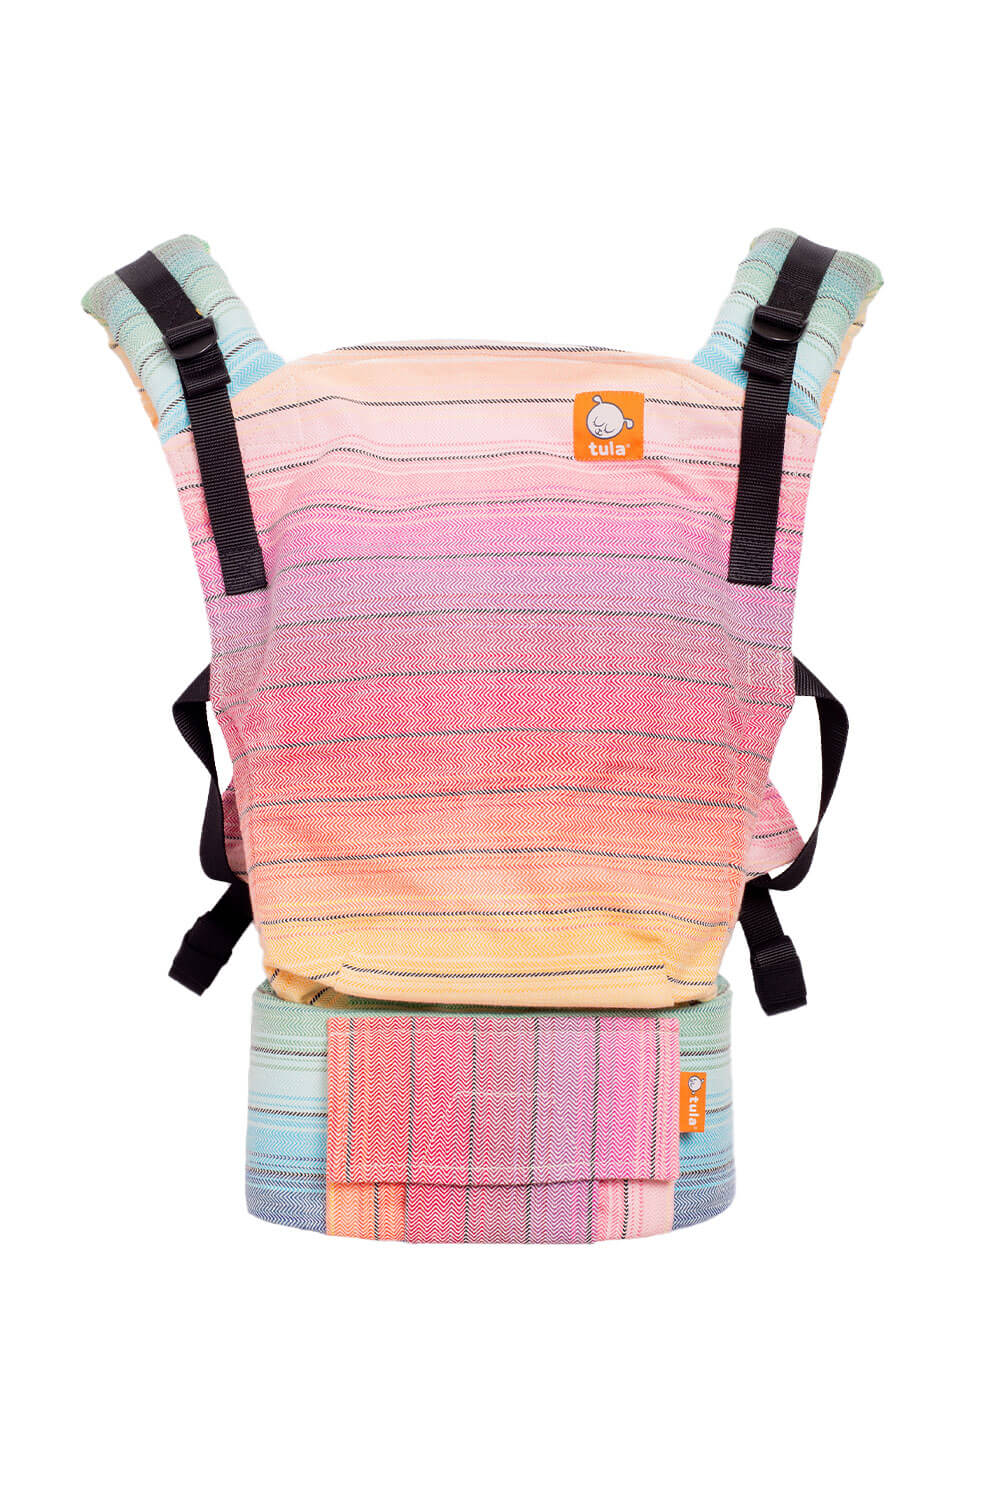 Sunset - Signature Handwoven Free-to-Grow Baby Carrier